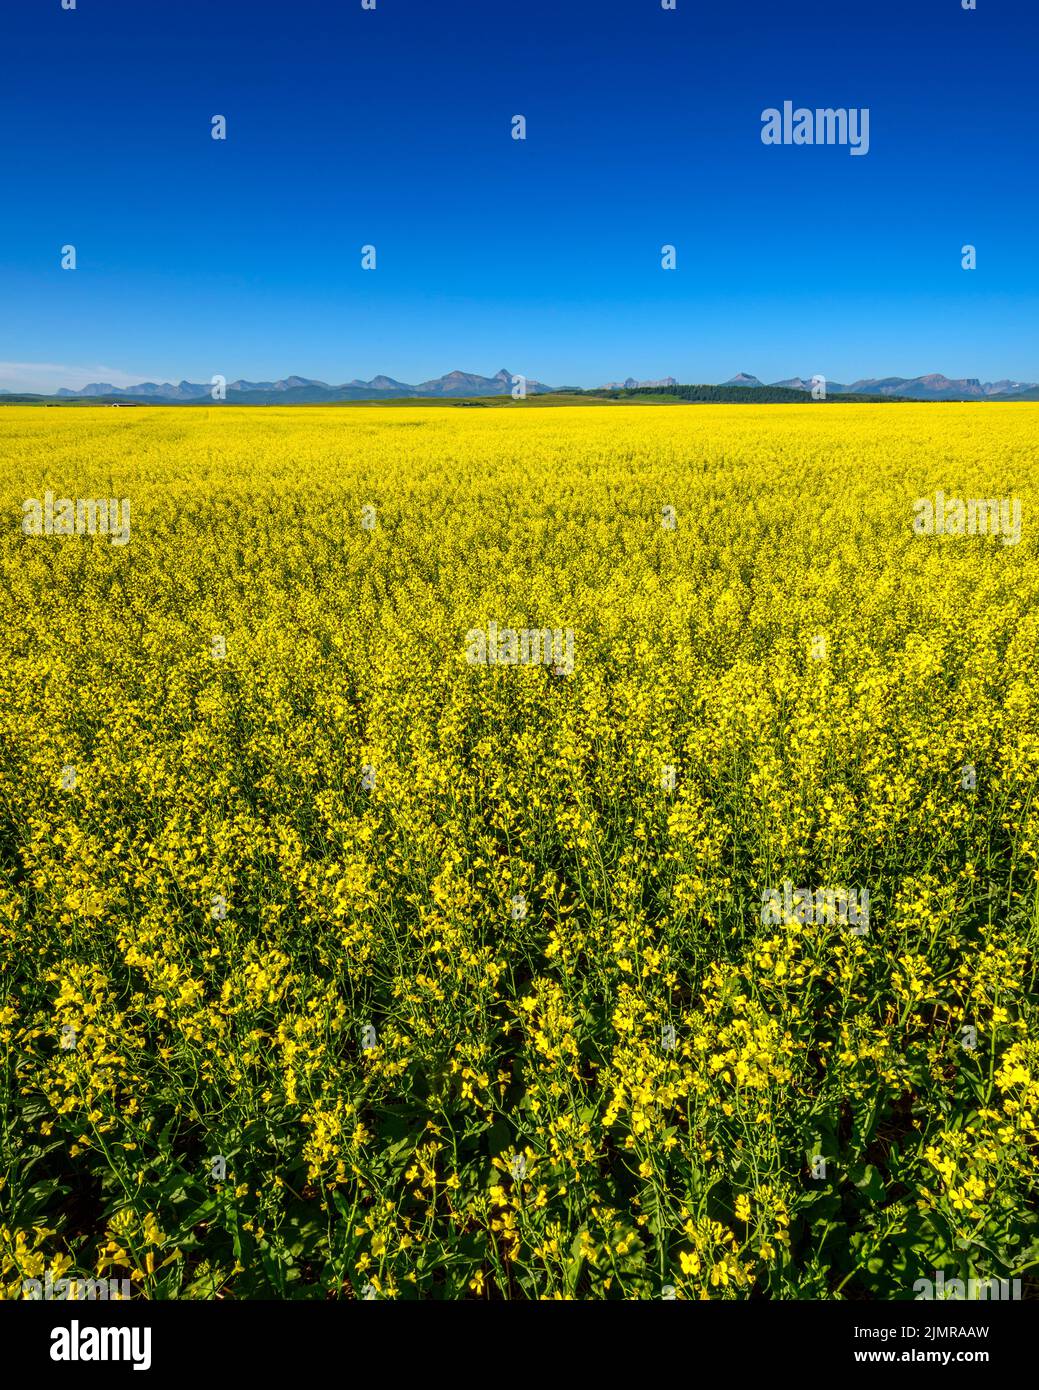 A field of bright yellow canola (Brassica napus) in bloom near the Rocky Mountains in southwestern Alberta Stock Photo